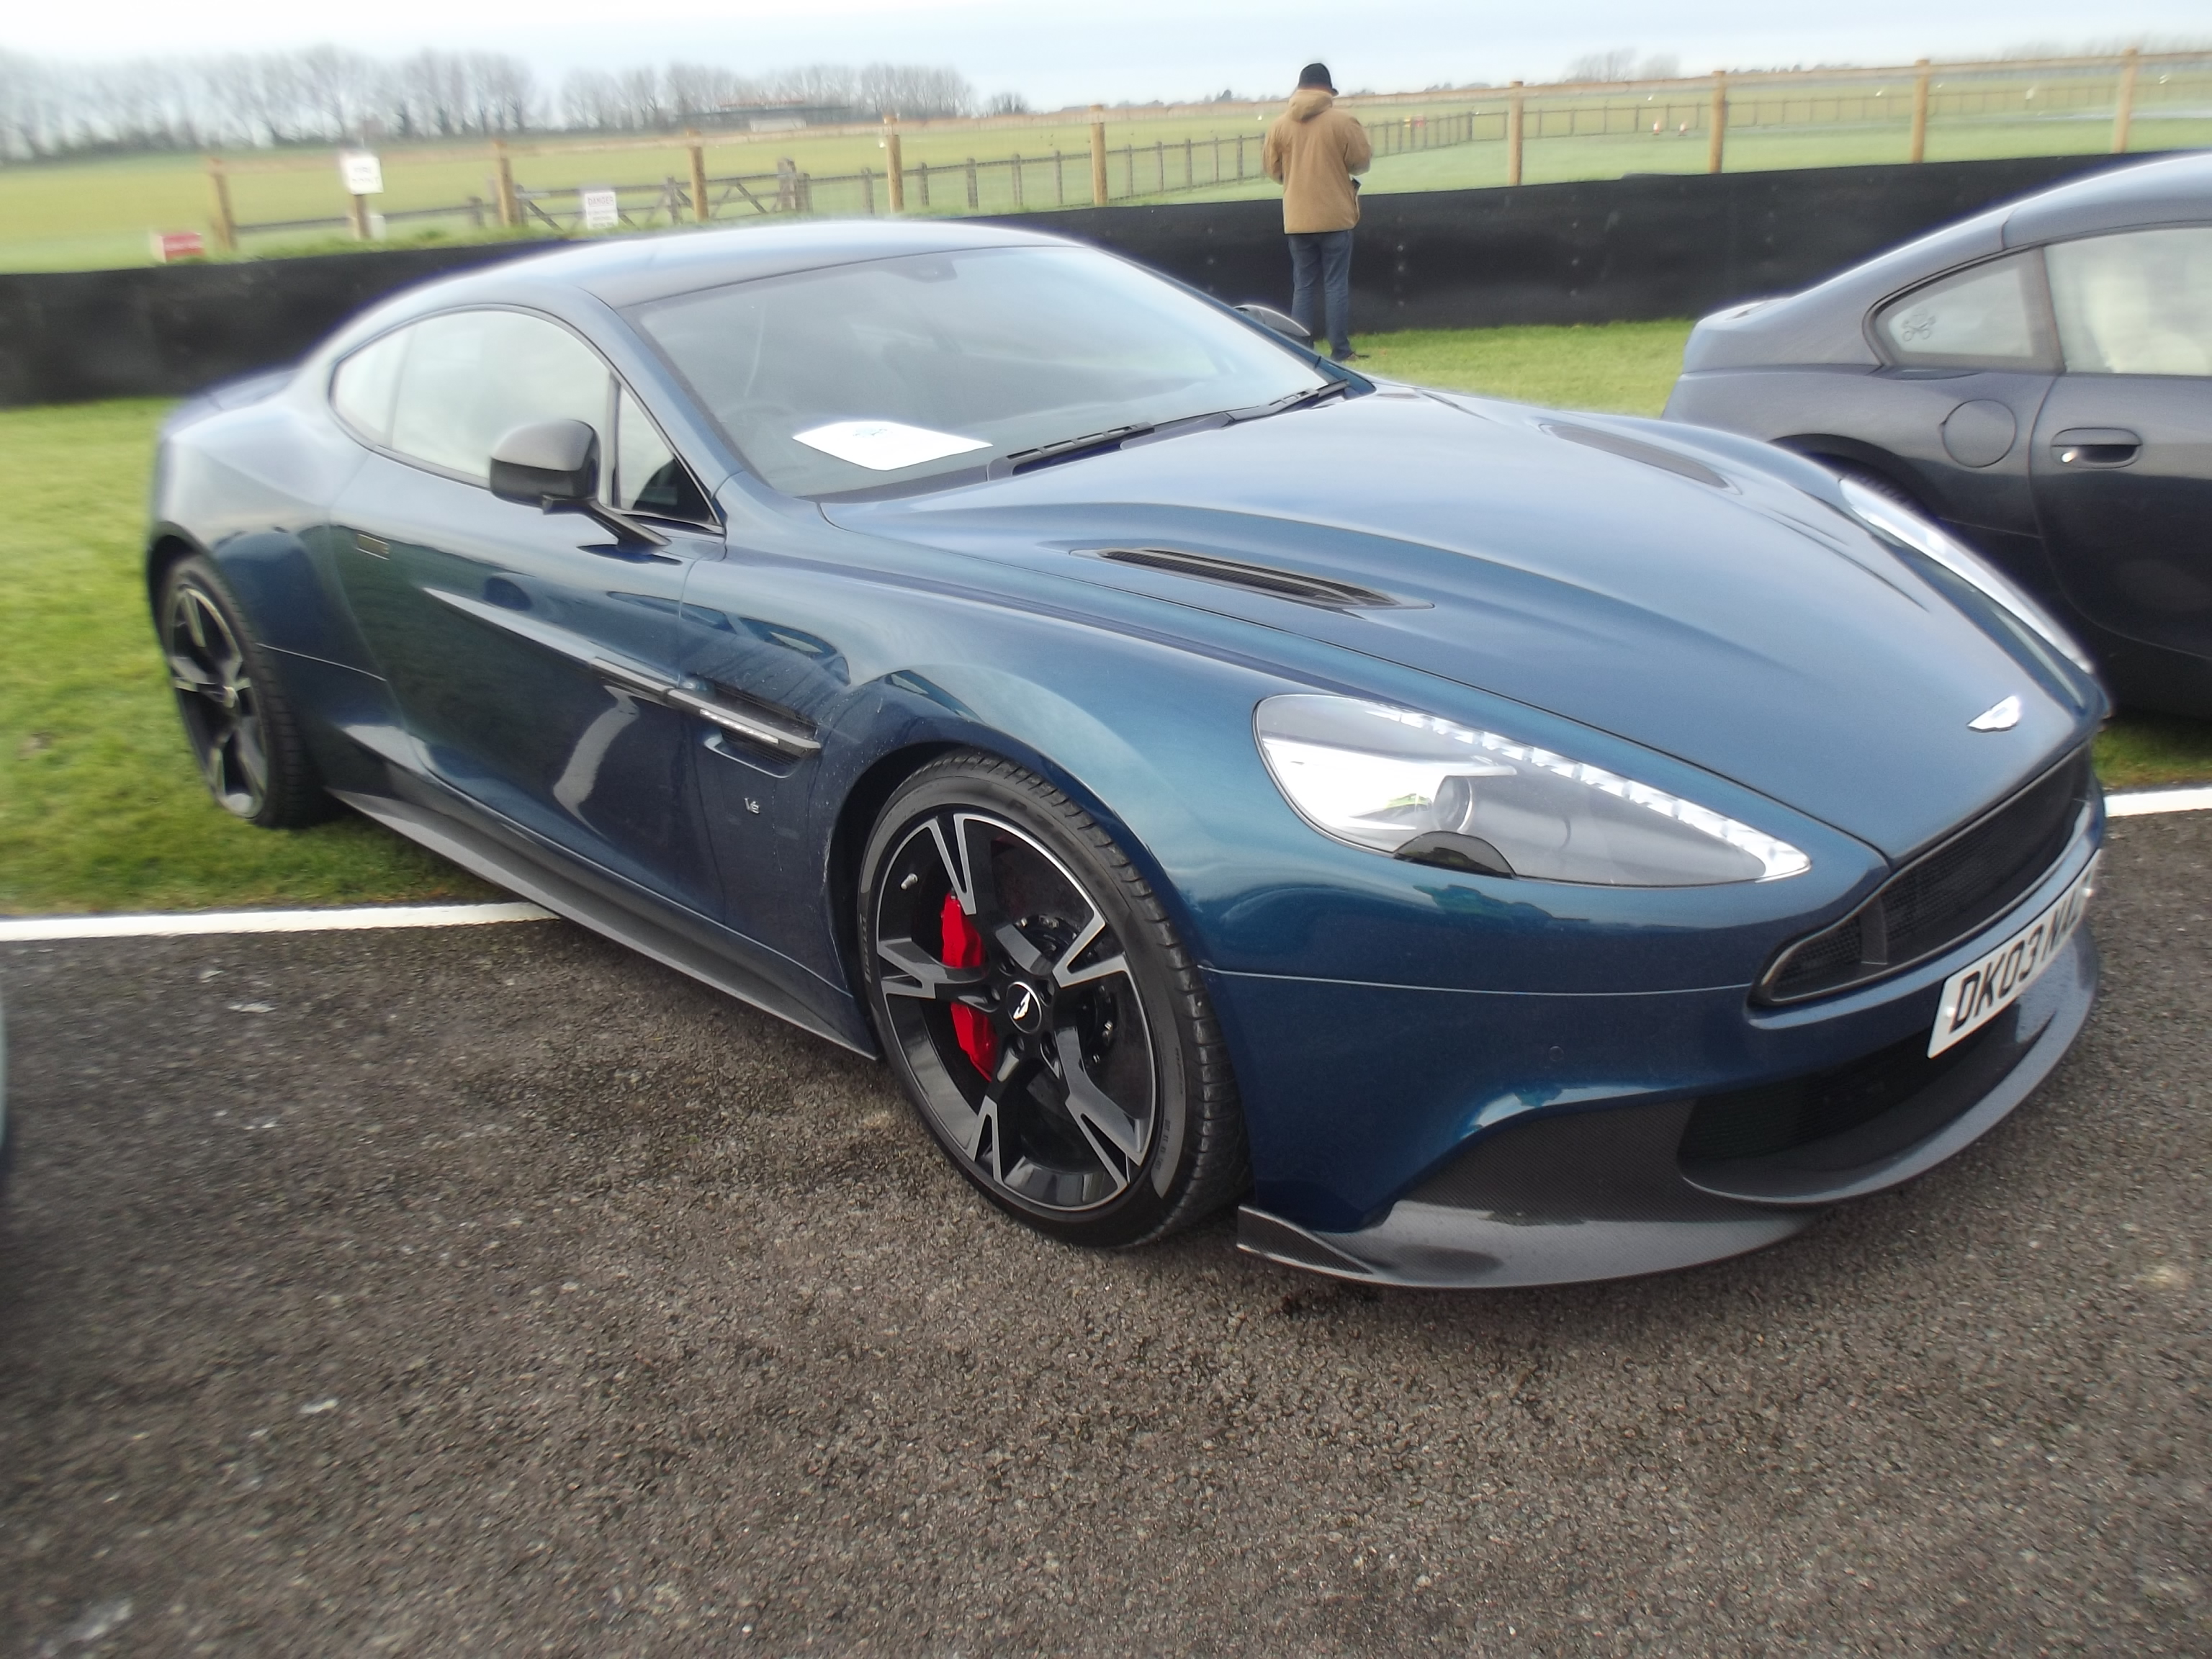 RE: Goodwood Sunday Service and track day 16-17/12 - Page 11 - Sunday Service - PistonHeads